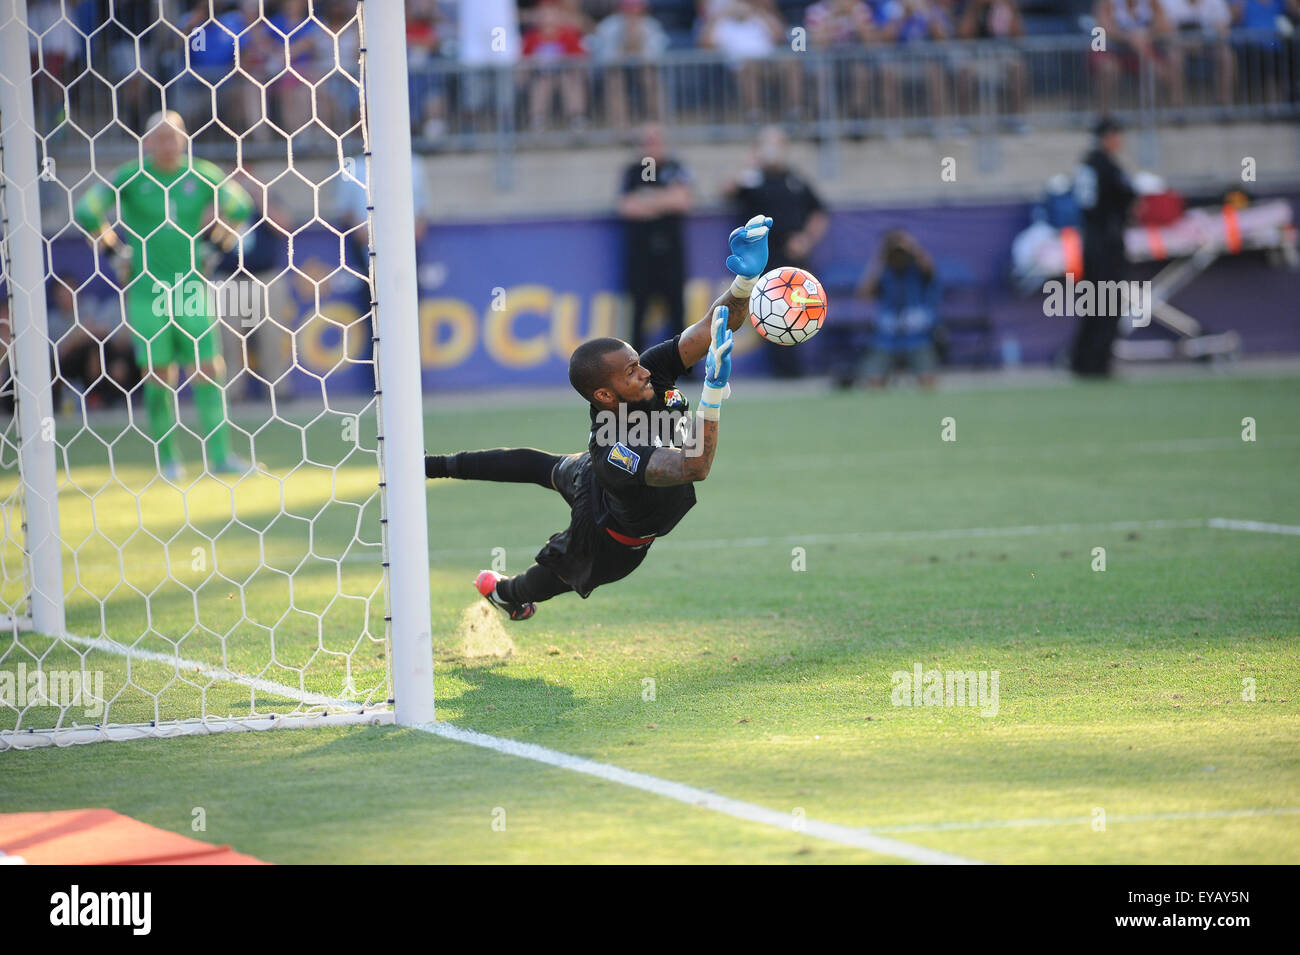 Chester, Pennsylvania, USA. 25th July, 2015. PANAMA goalie, JAIME PENEDO (1) attempts to block a penalty kick during the third place match which was played at PPL Park in Chester Pa (Credit Image: © Ricky Fitchett via ZUMA Wire) Stock Photo